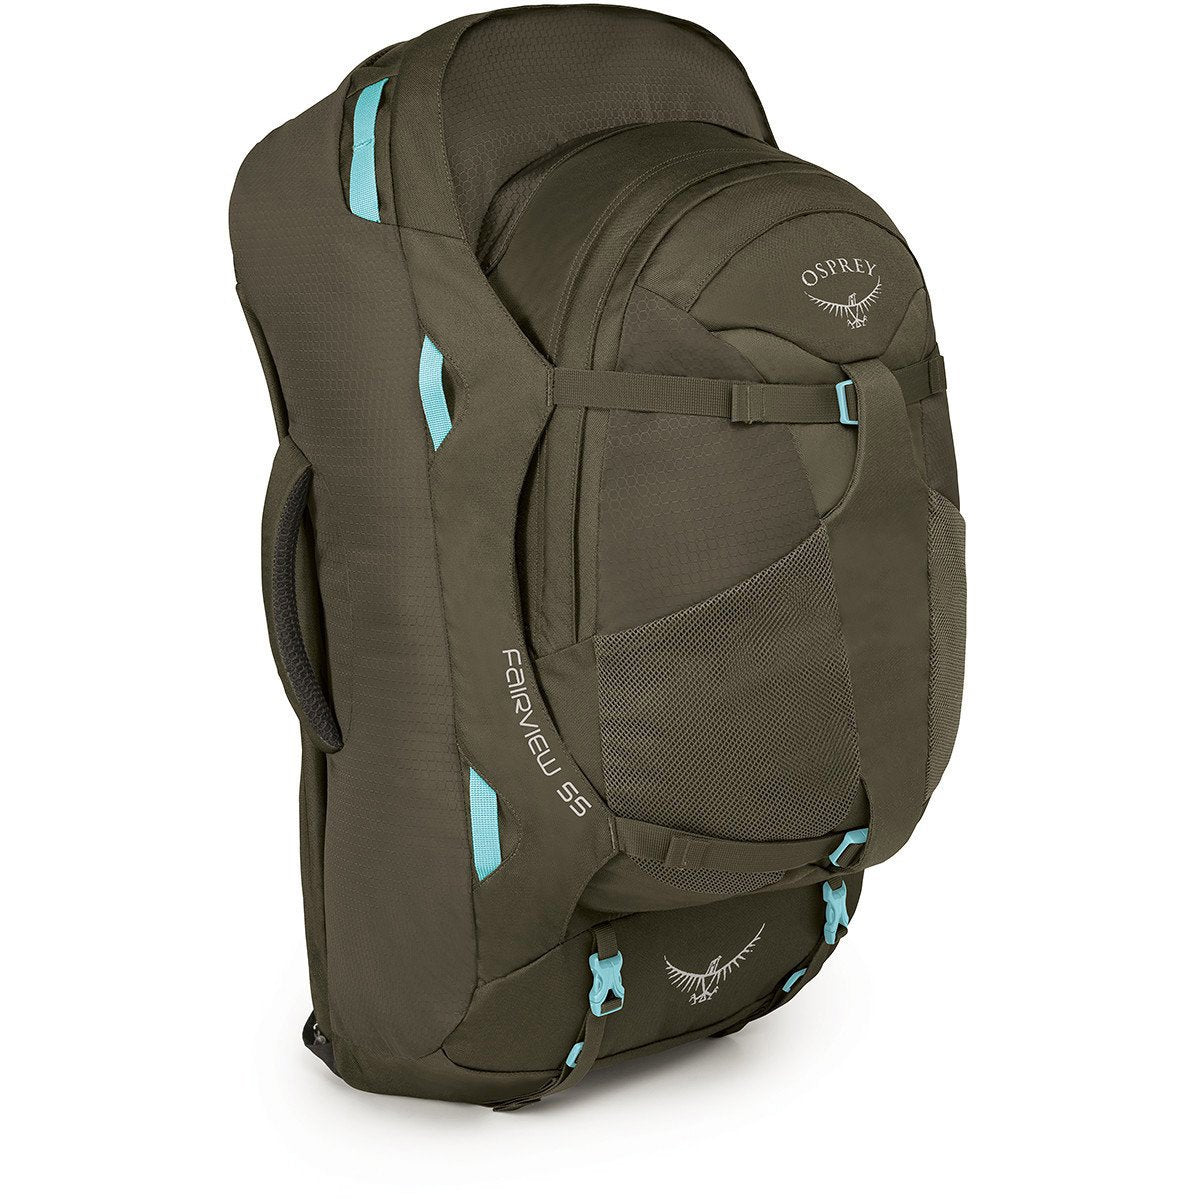 Fairview Travel Pack 55